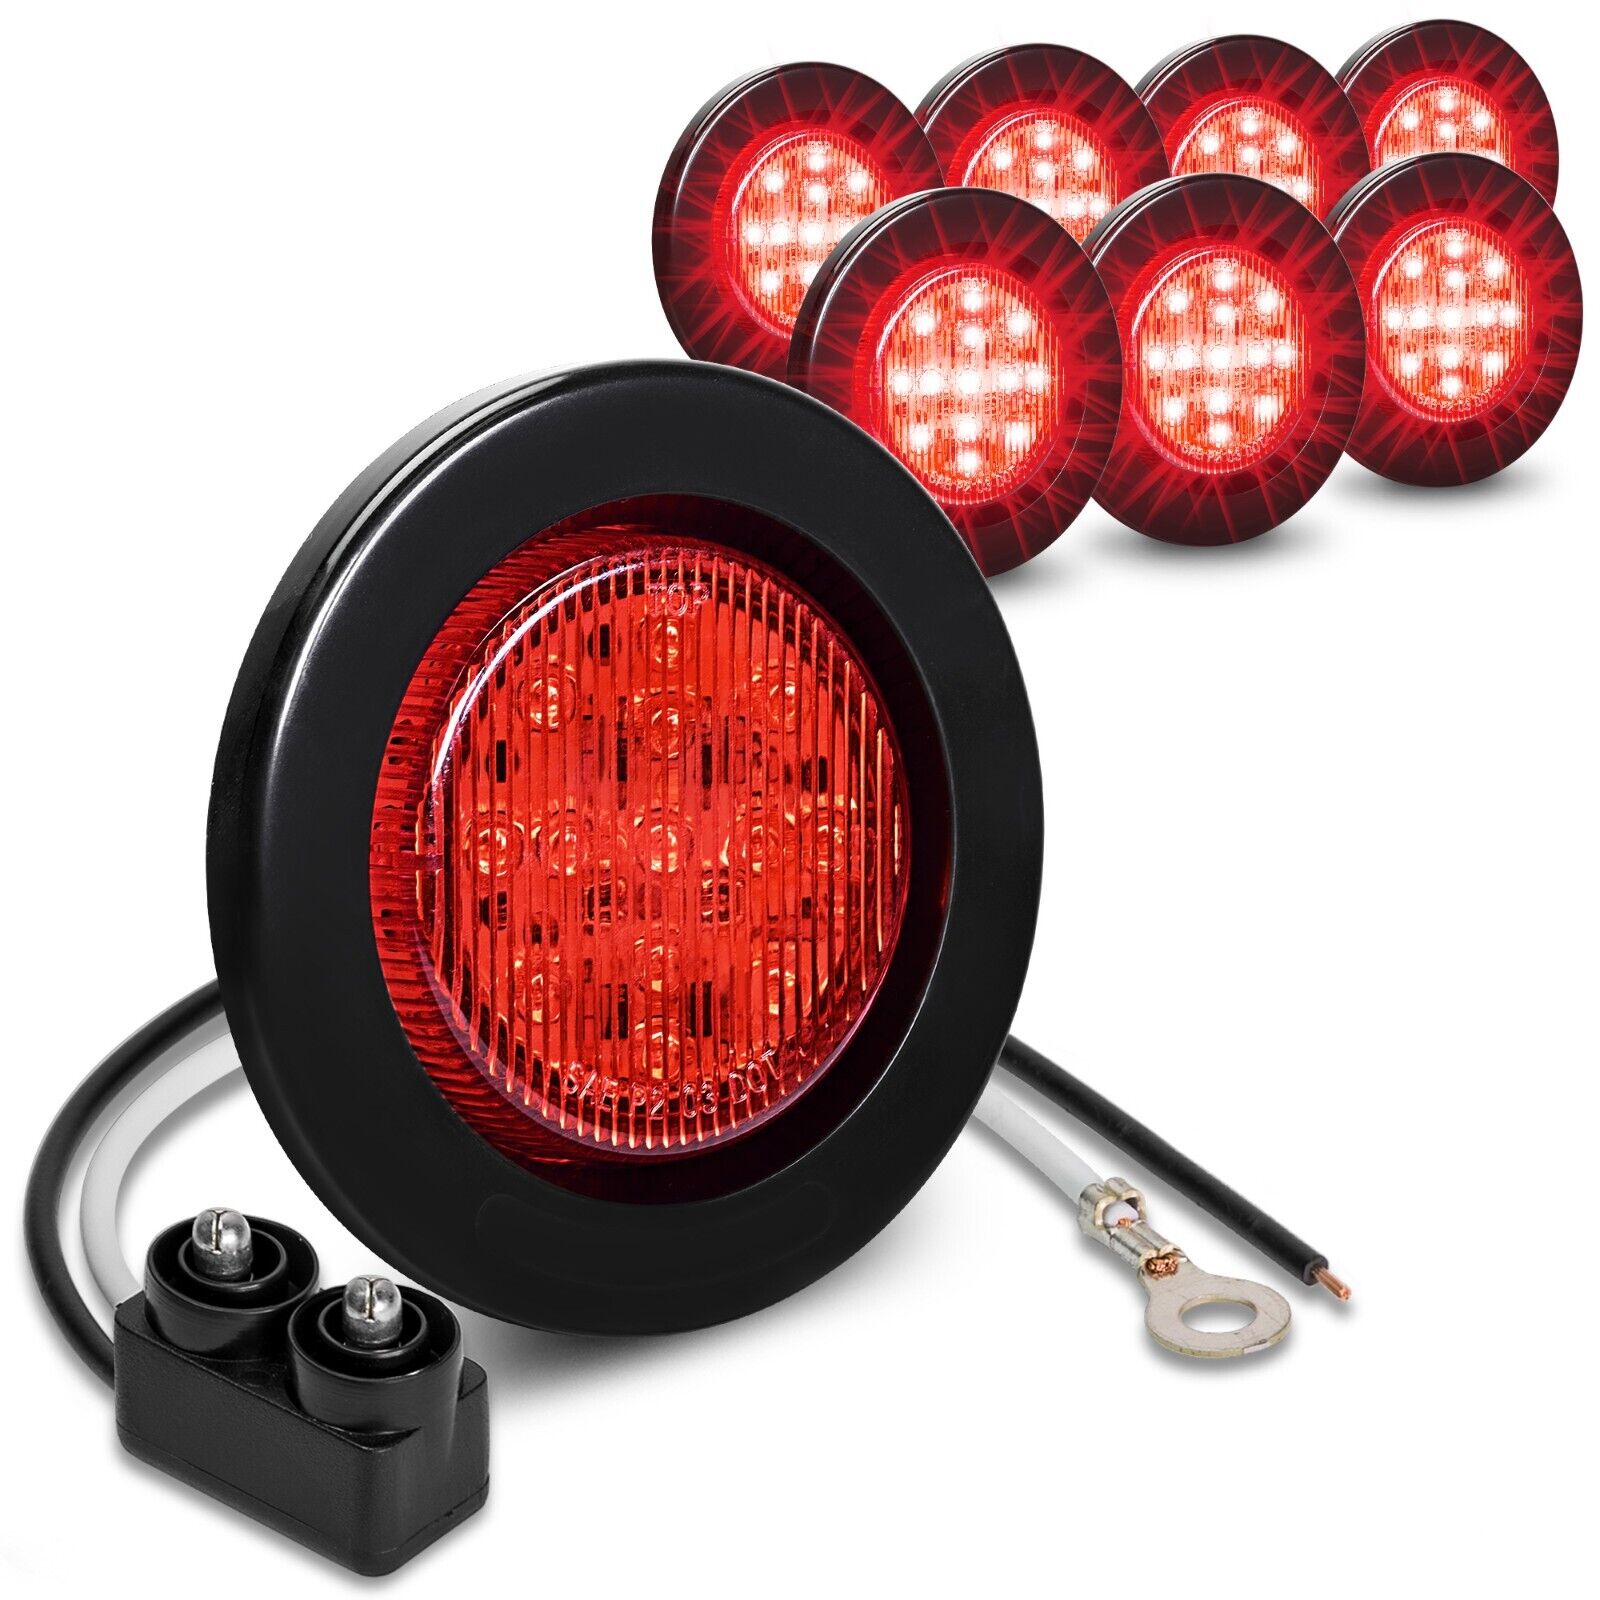 8pc 2.5 Inch DOT Round Red LED Trailer Side Marker Lights with Grommet for Truck